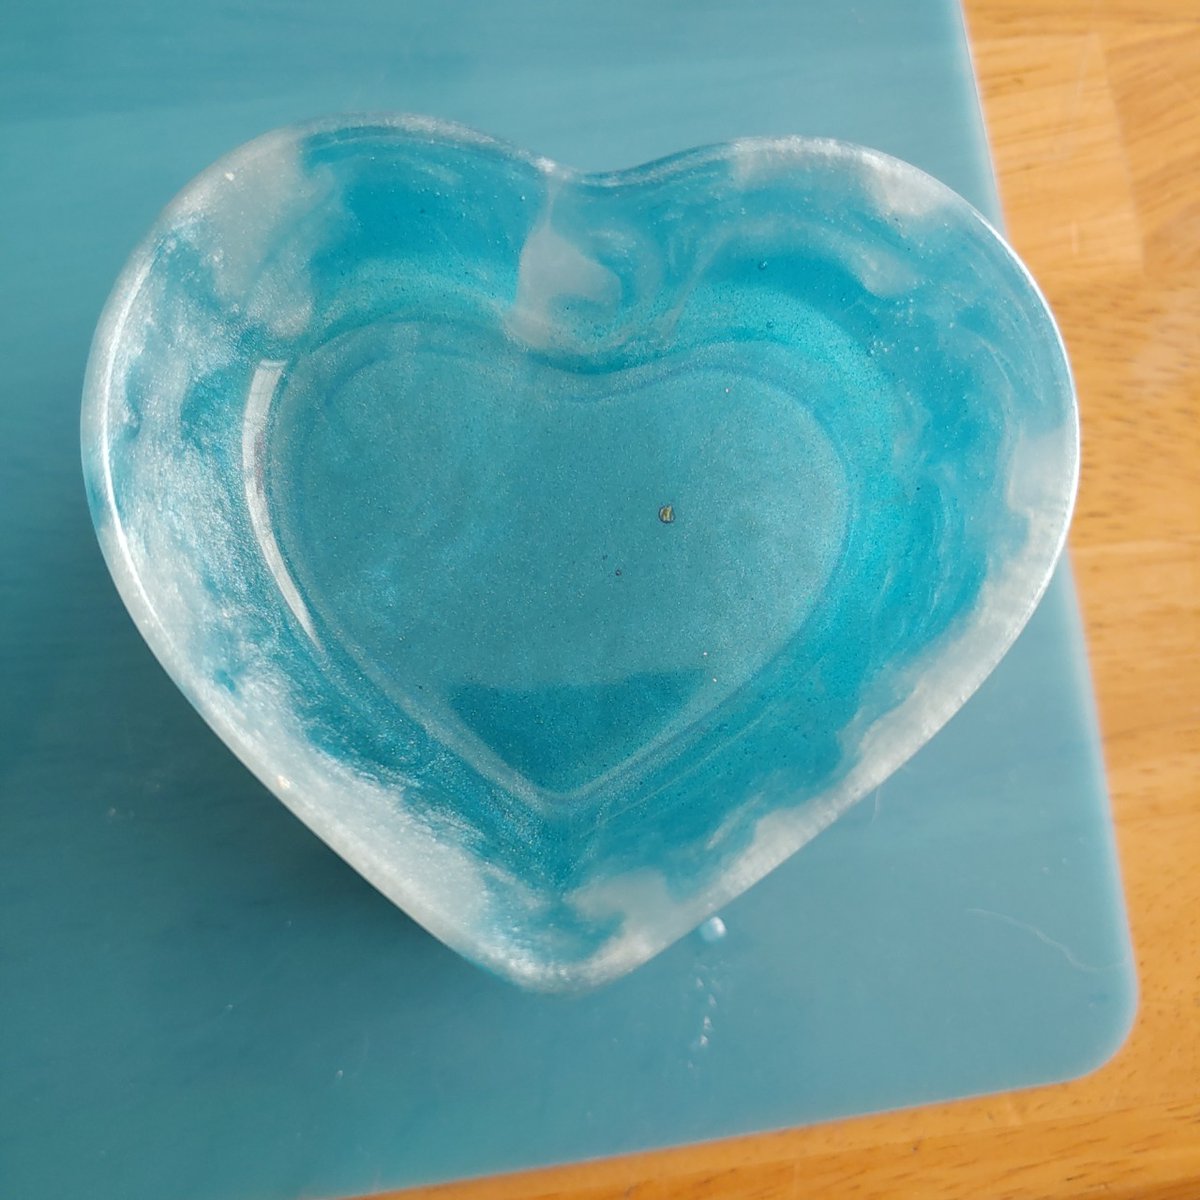 I don't like the mix with this one but it required more fine detail than the others & my left arm was not having it sooooo whatever it cured right and that's all that matters I guess

#resinart #trinketdish #heartdish #minidish #oceanthemed